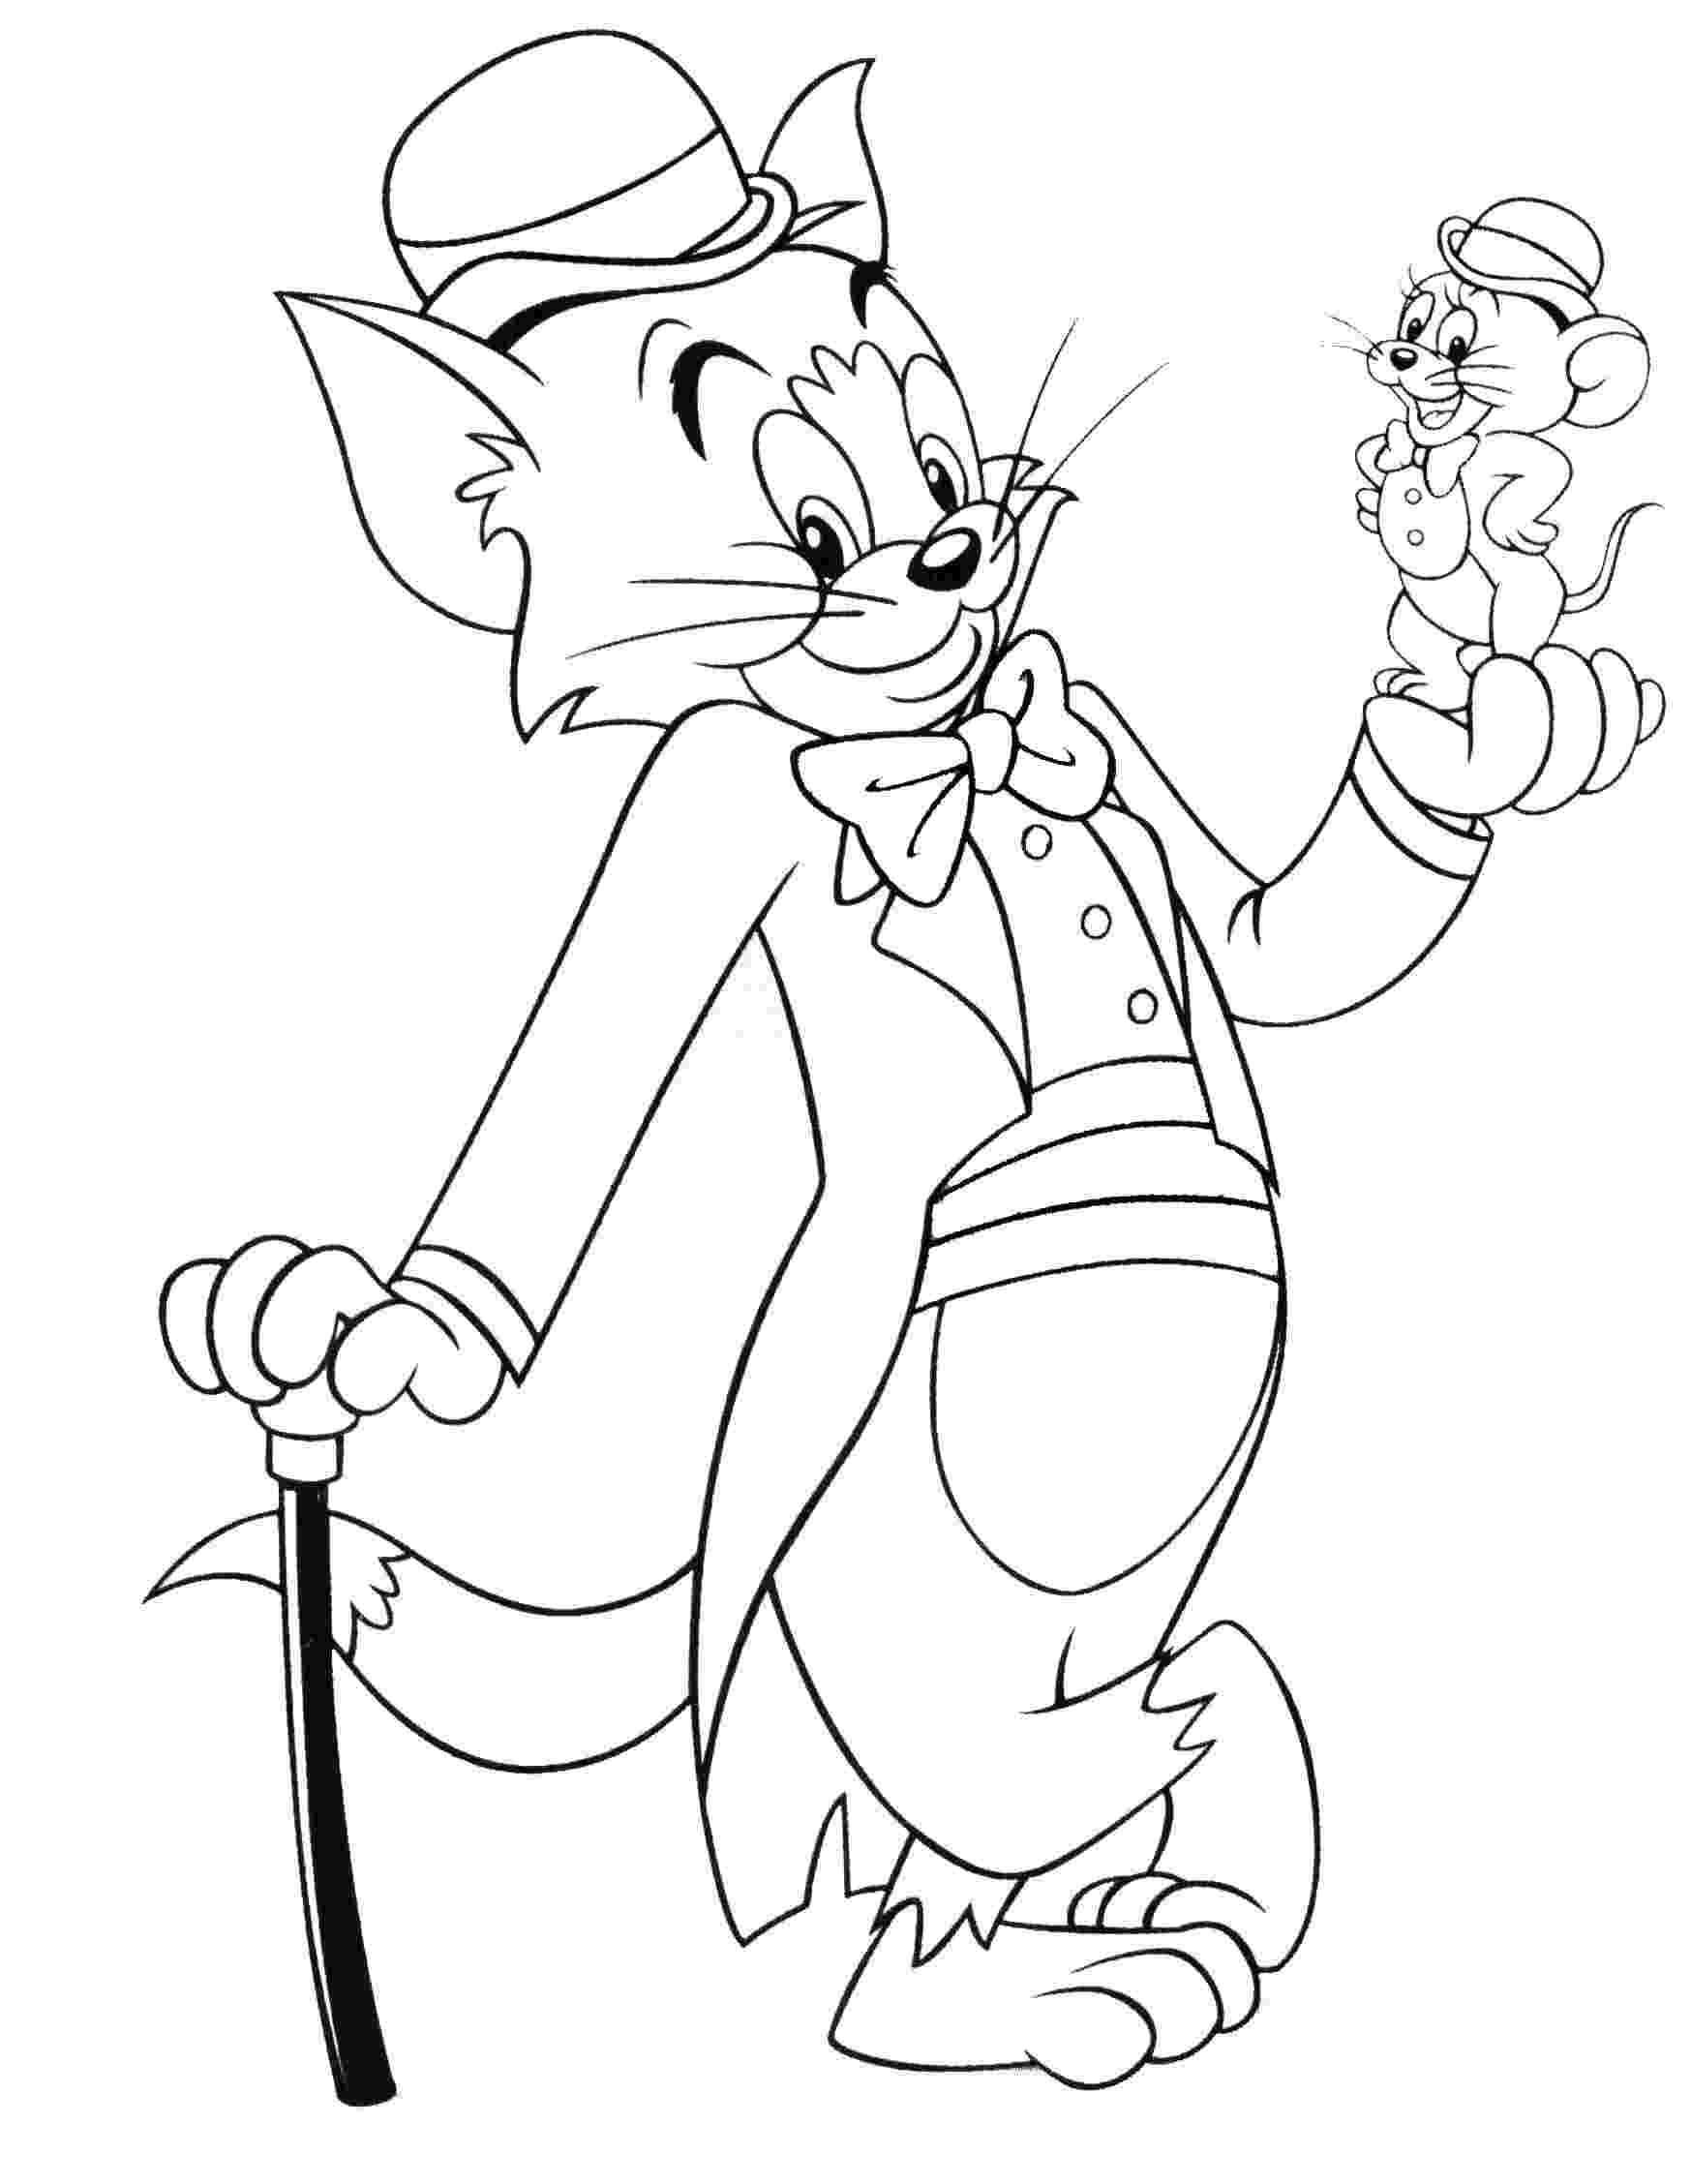 tom and jerry coloring book pages free printable tom and jerry coloring pages for kids and book jerry coloring pages tom 